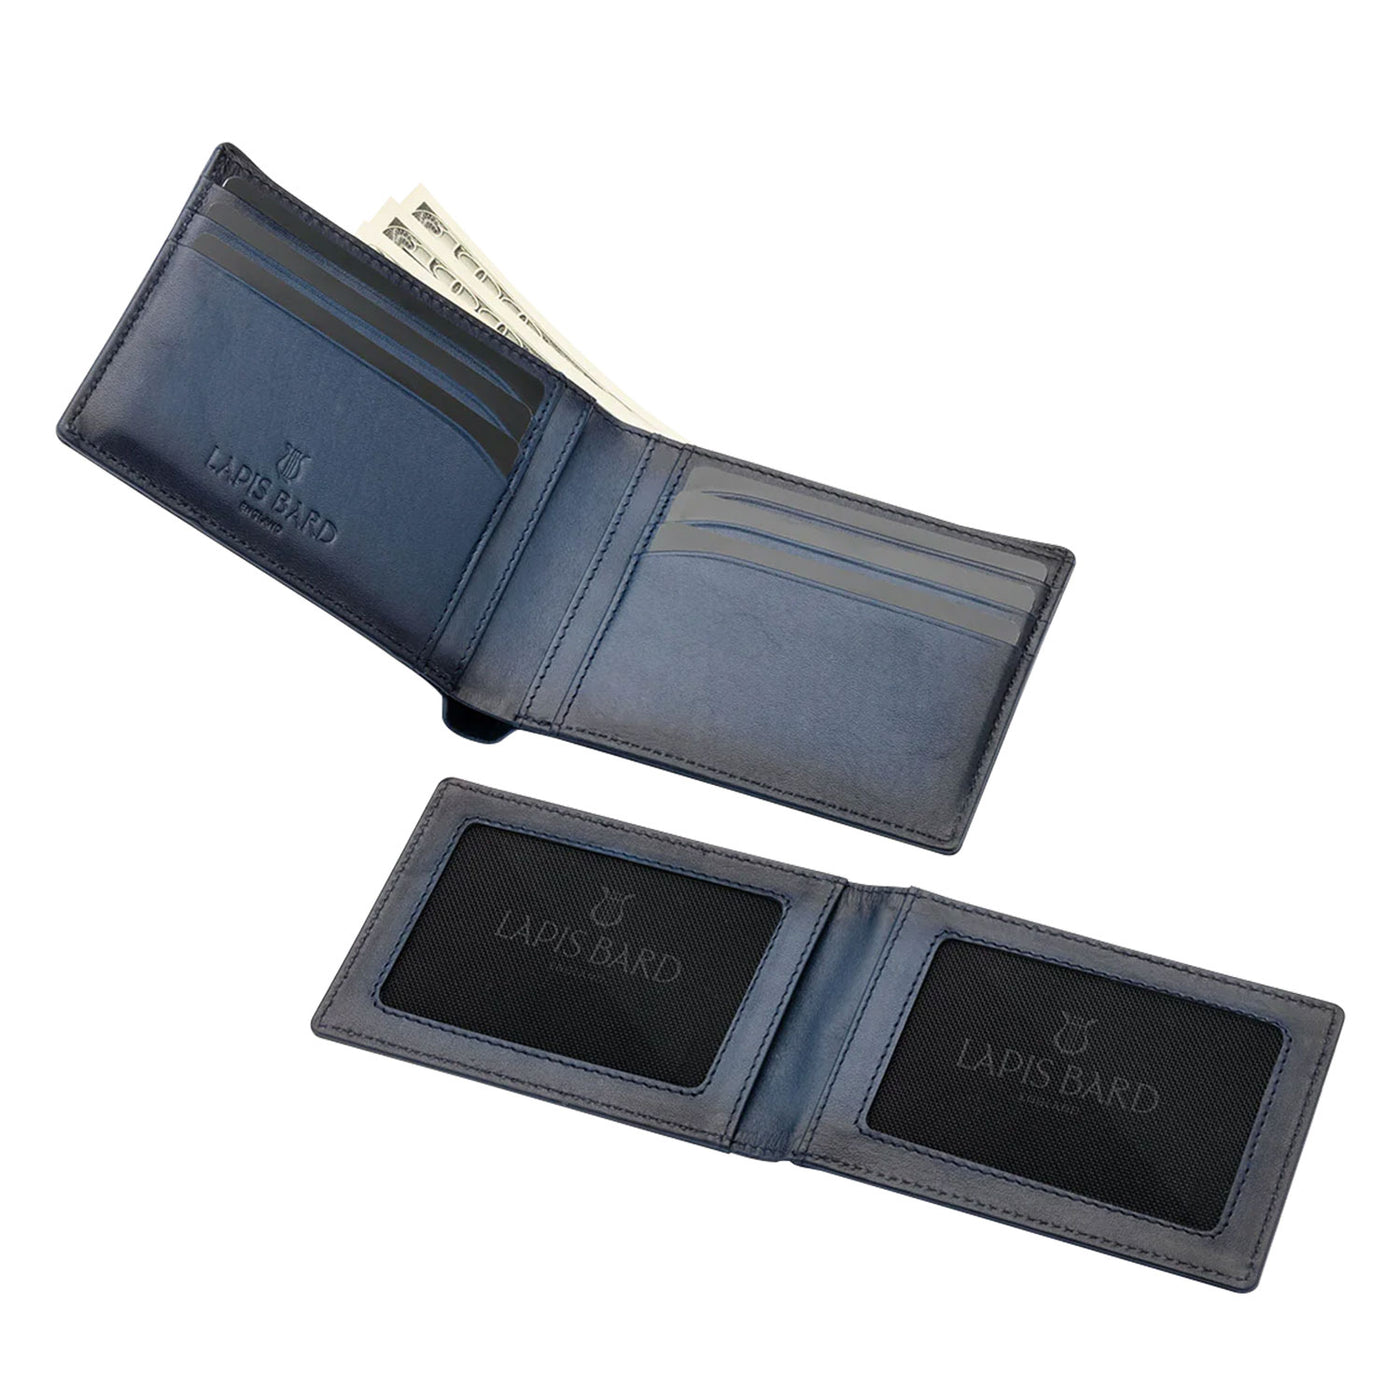 Lapis Bard Ducorium Bifold Evening 6cc Wallet with Additional Sleeve - Blue 3